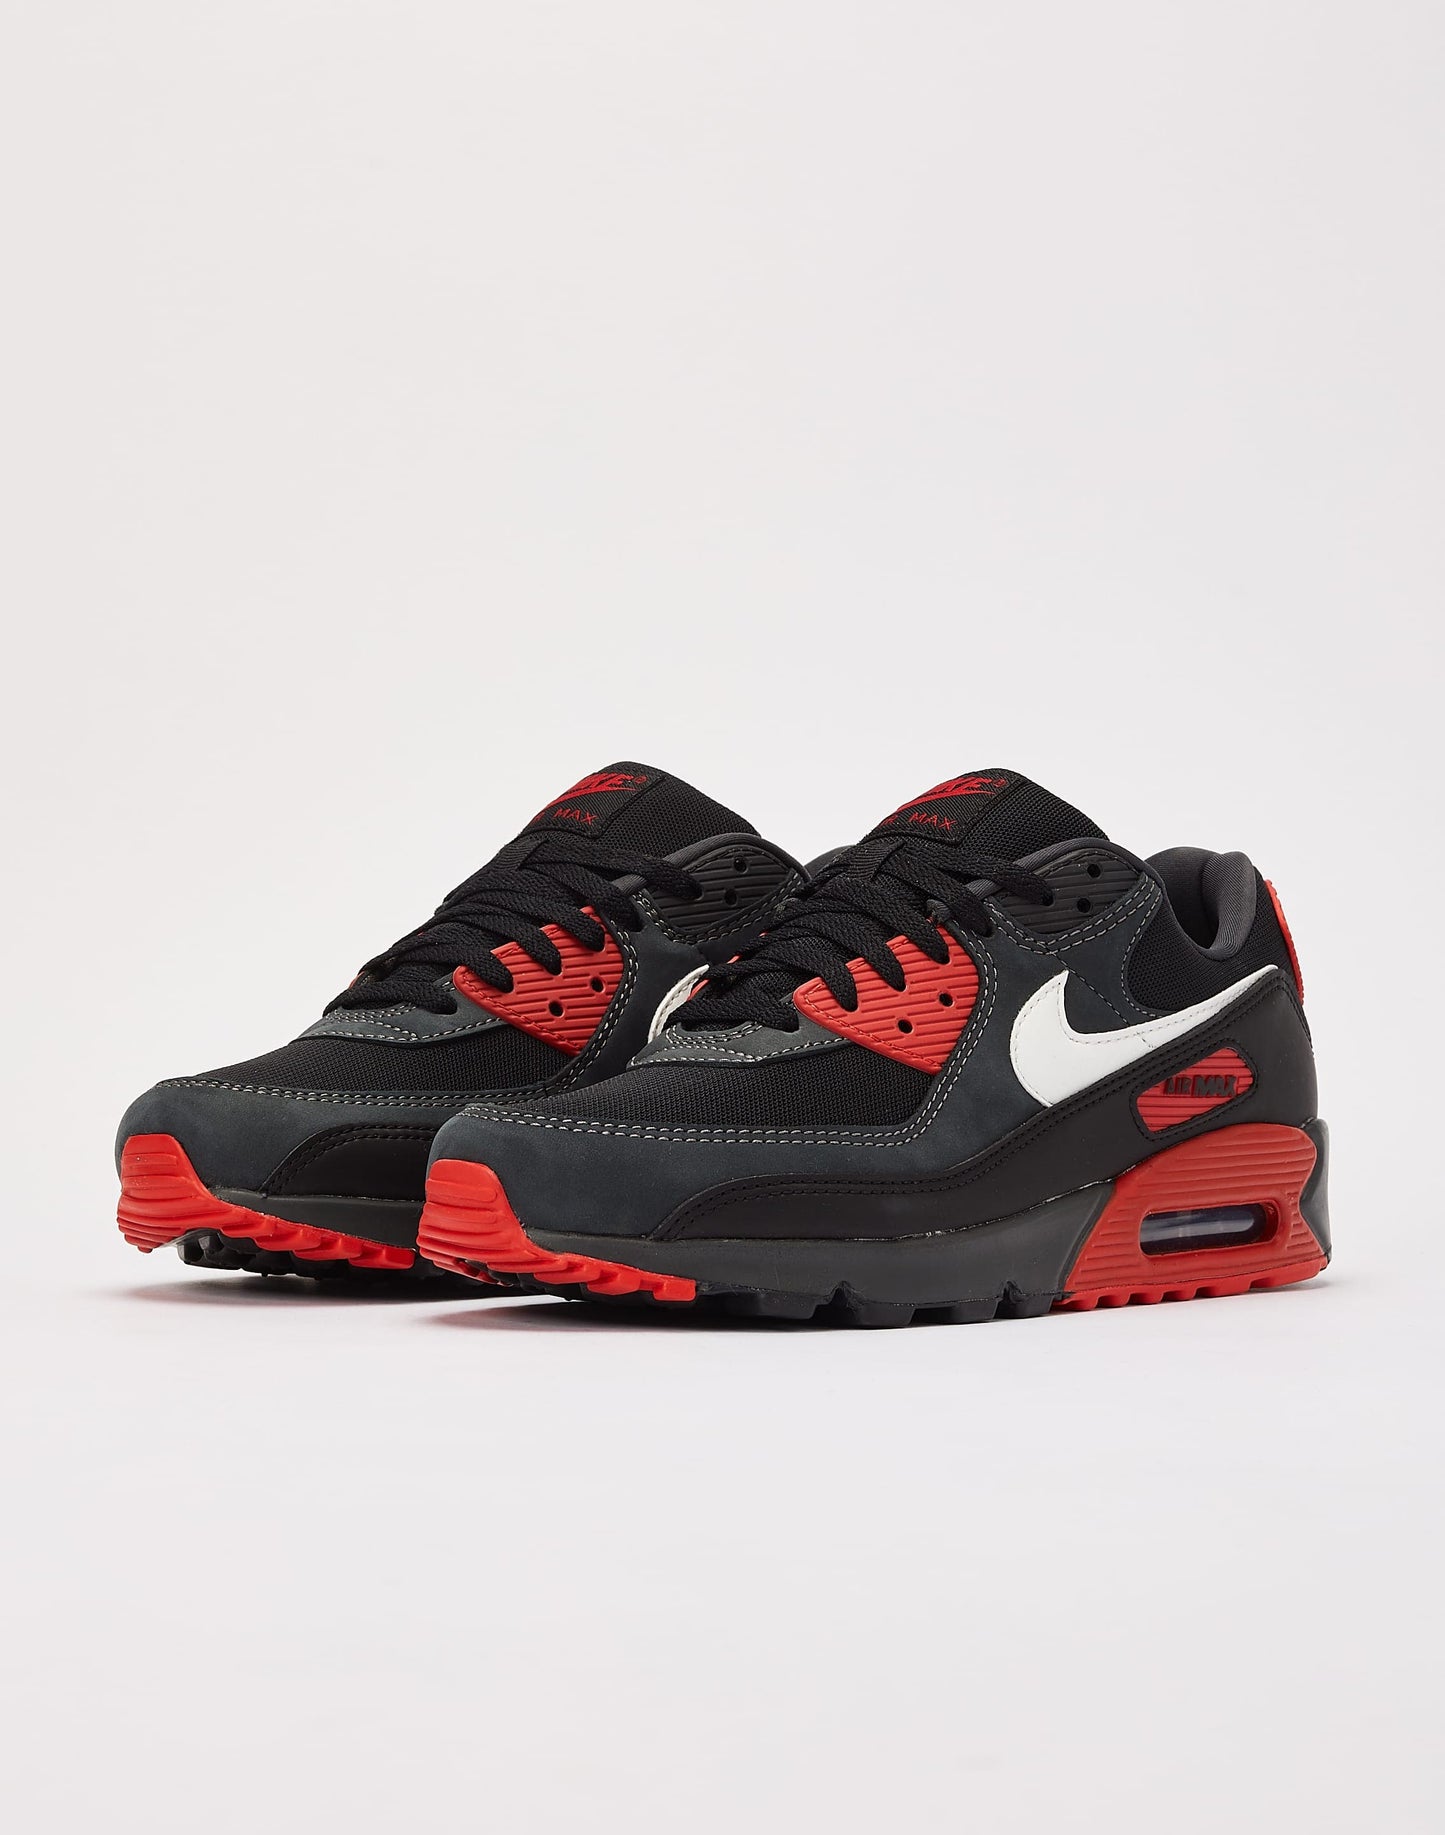 AIR MAX 90/ ANTHRACITE/SMMT